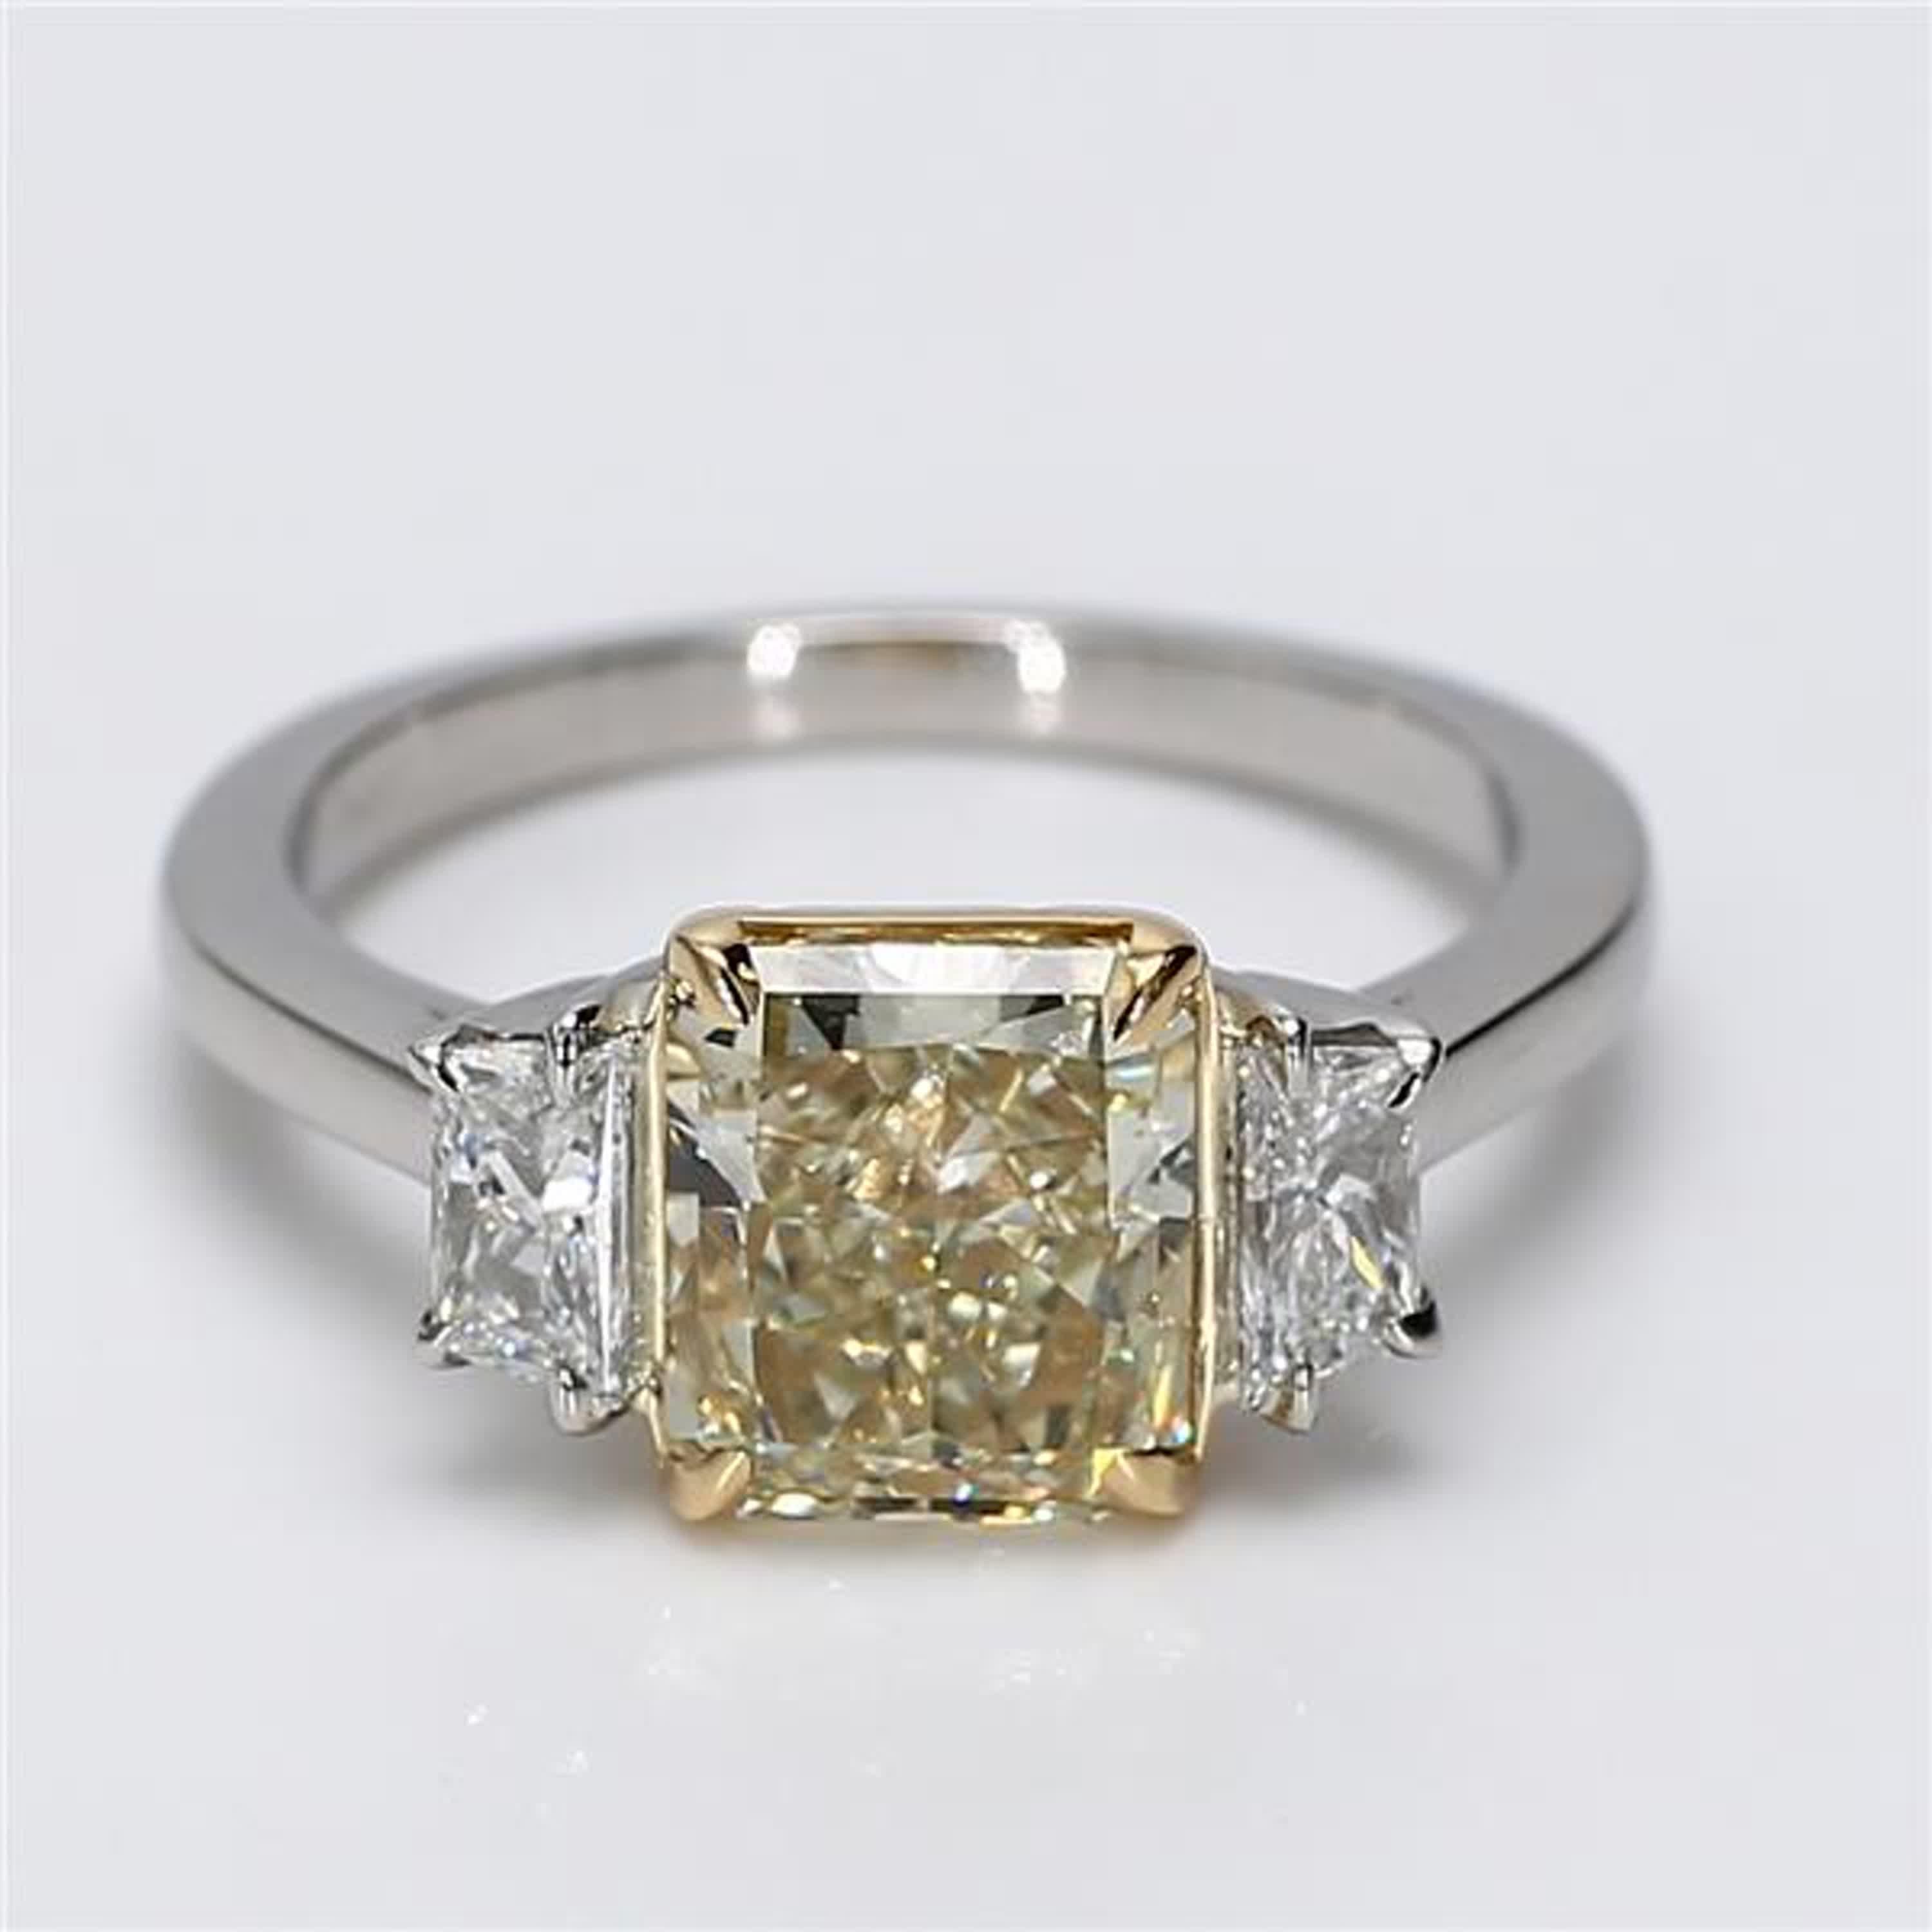 RareGemWorld's classic GIA certified diamond ring. Mounted in a beautiful Platinum/18K Gold setting with a natural radiant cut yellow diamond. The yellow diamond is surrounded by natural taper baguette cut white diamonds. This ring is guaranteed to